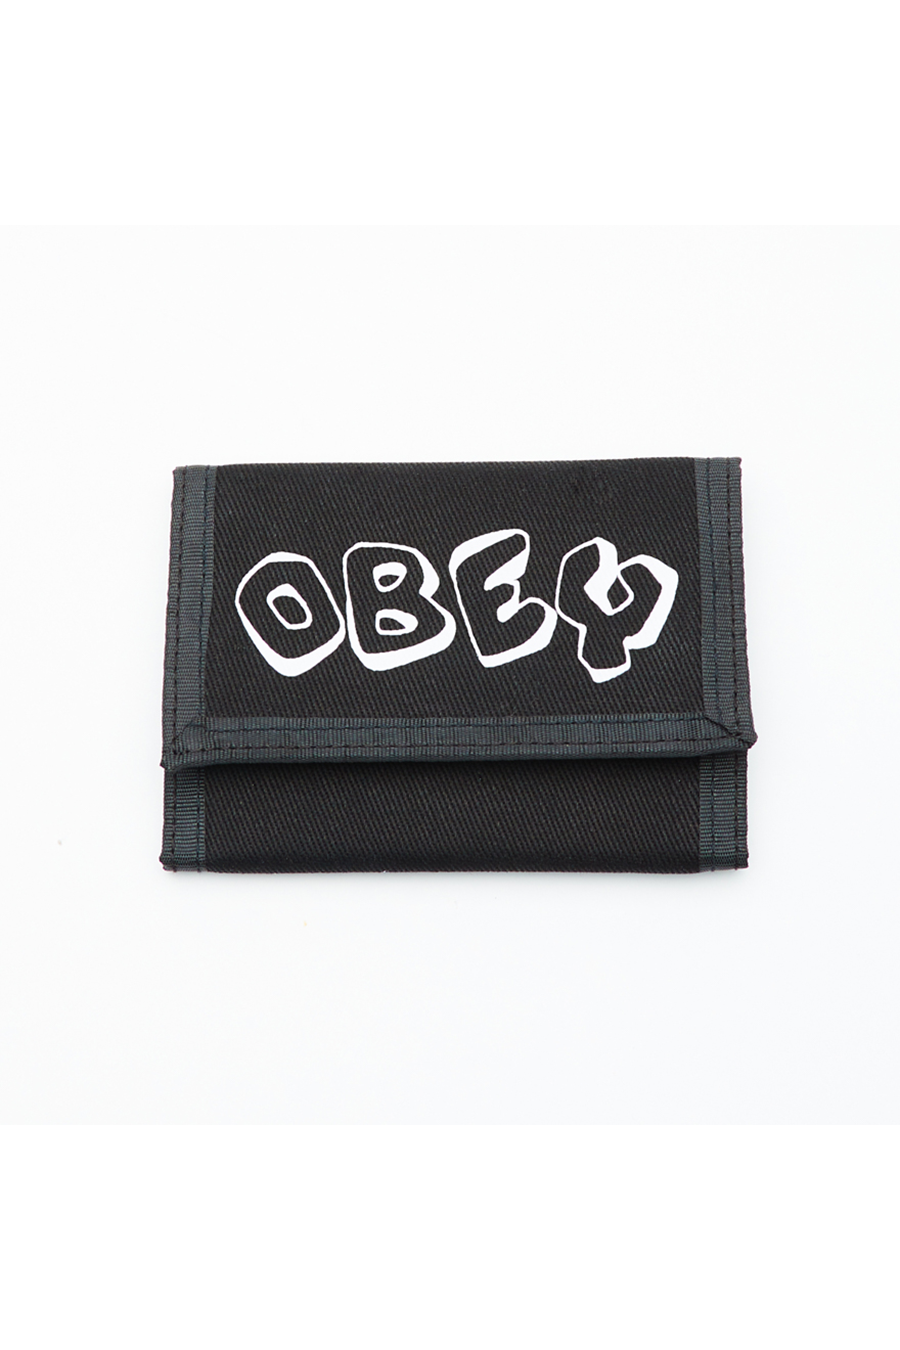 Obey Block Trifold Wallet | Black - Main Image Number 1 of 2